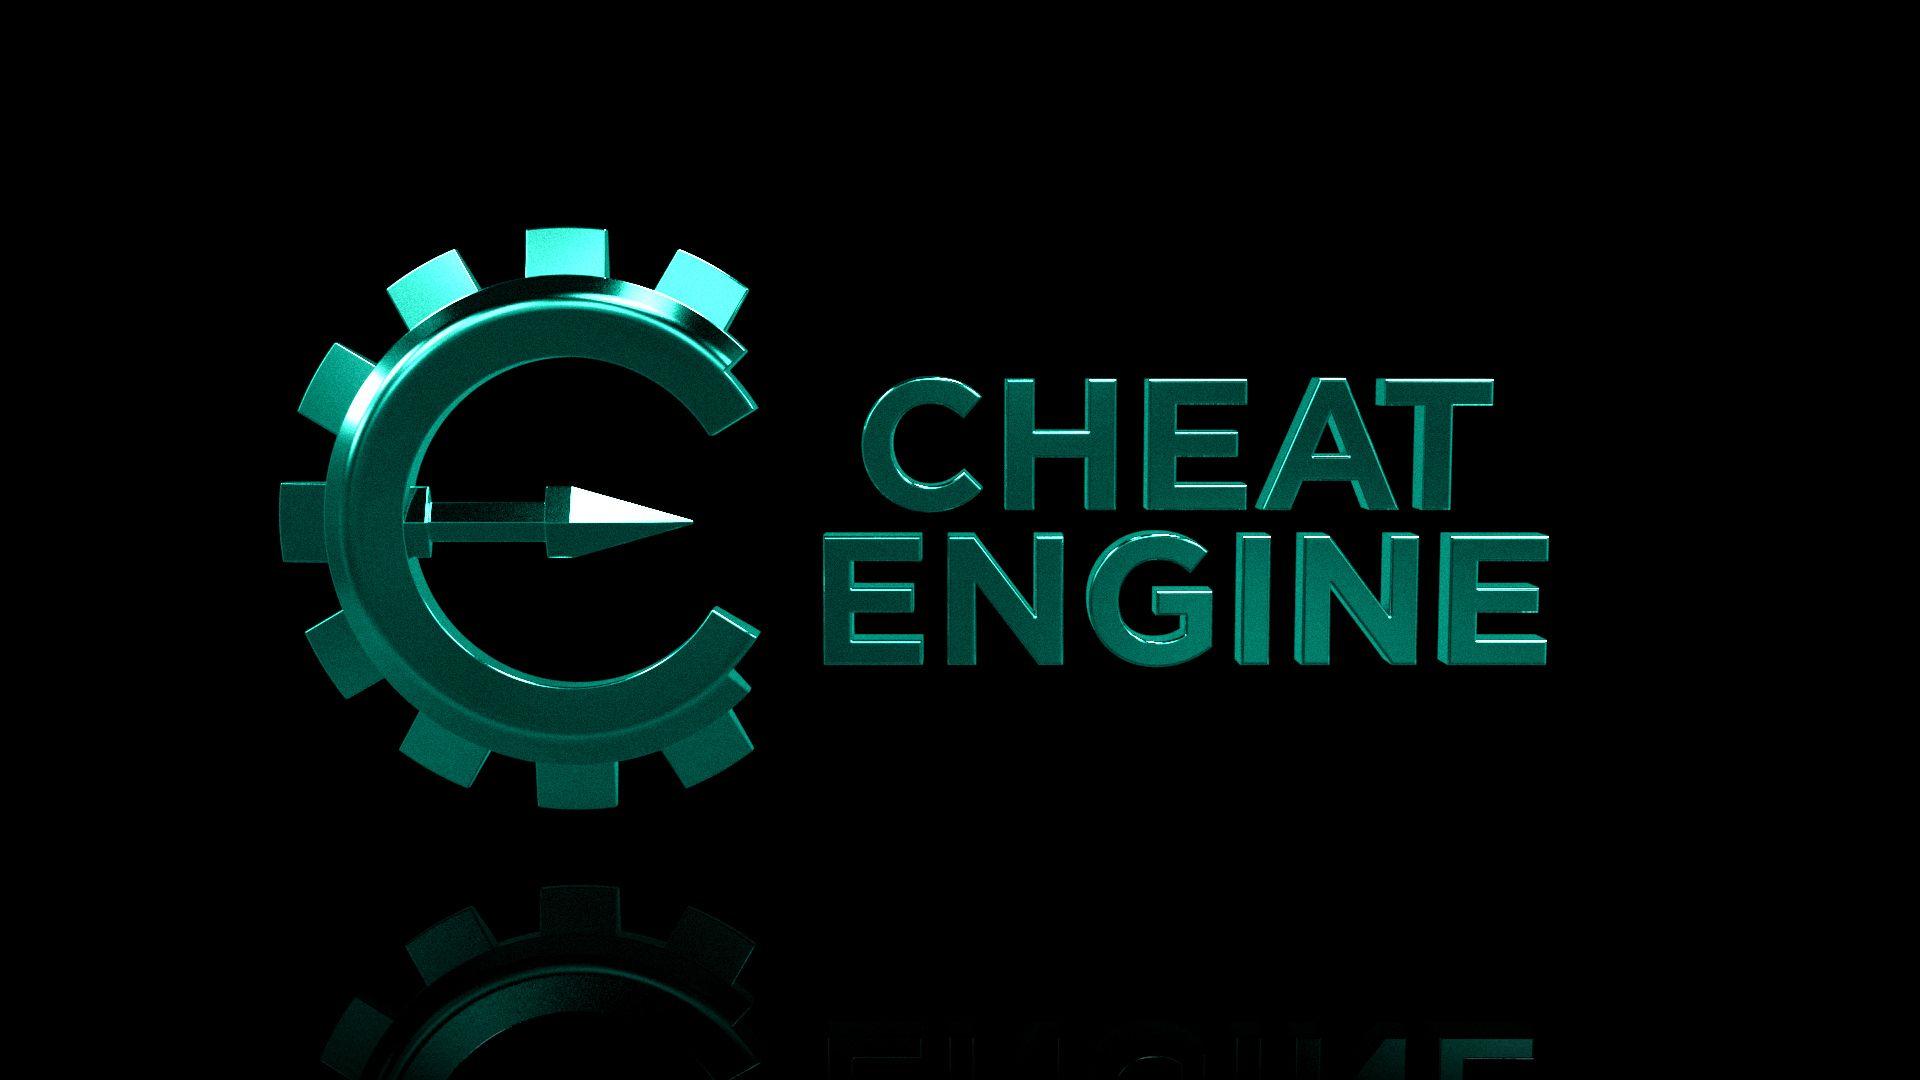 Engine Logo - Cheat Engine :: View topic - Cheat Engine logo ... in 3D